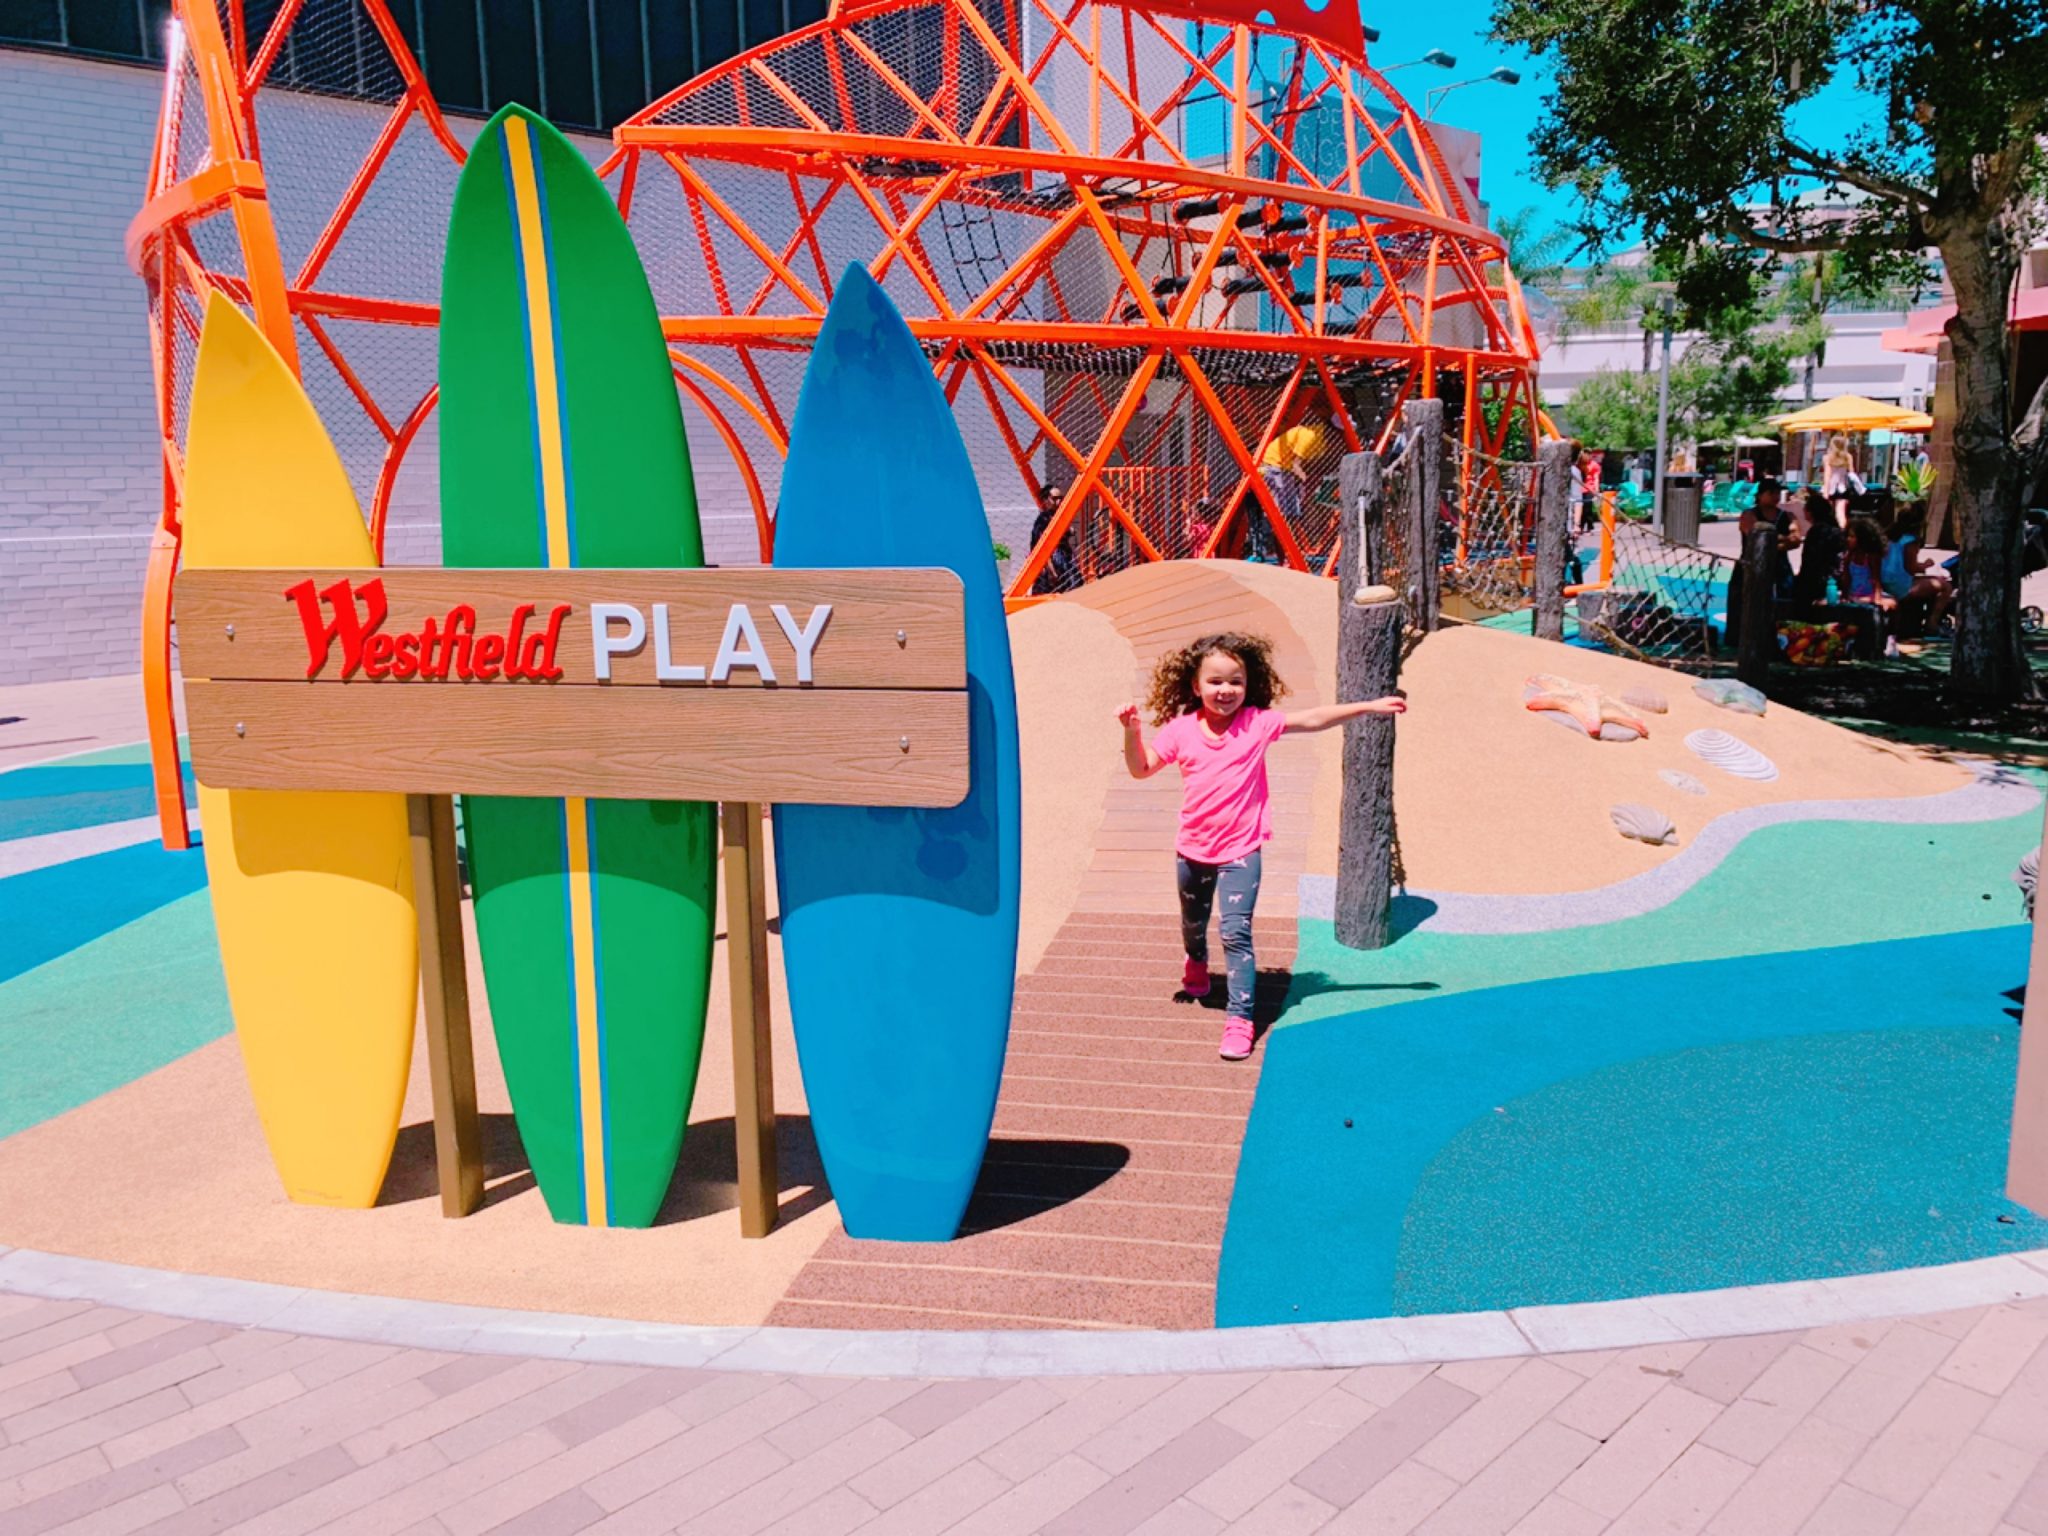 Sponsored} Westfield UTC Play Space: Built with Moms in Mind